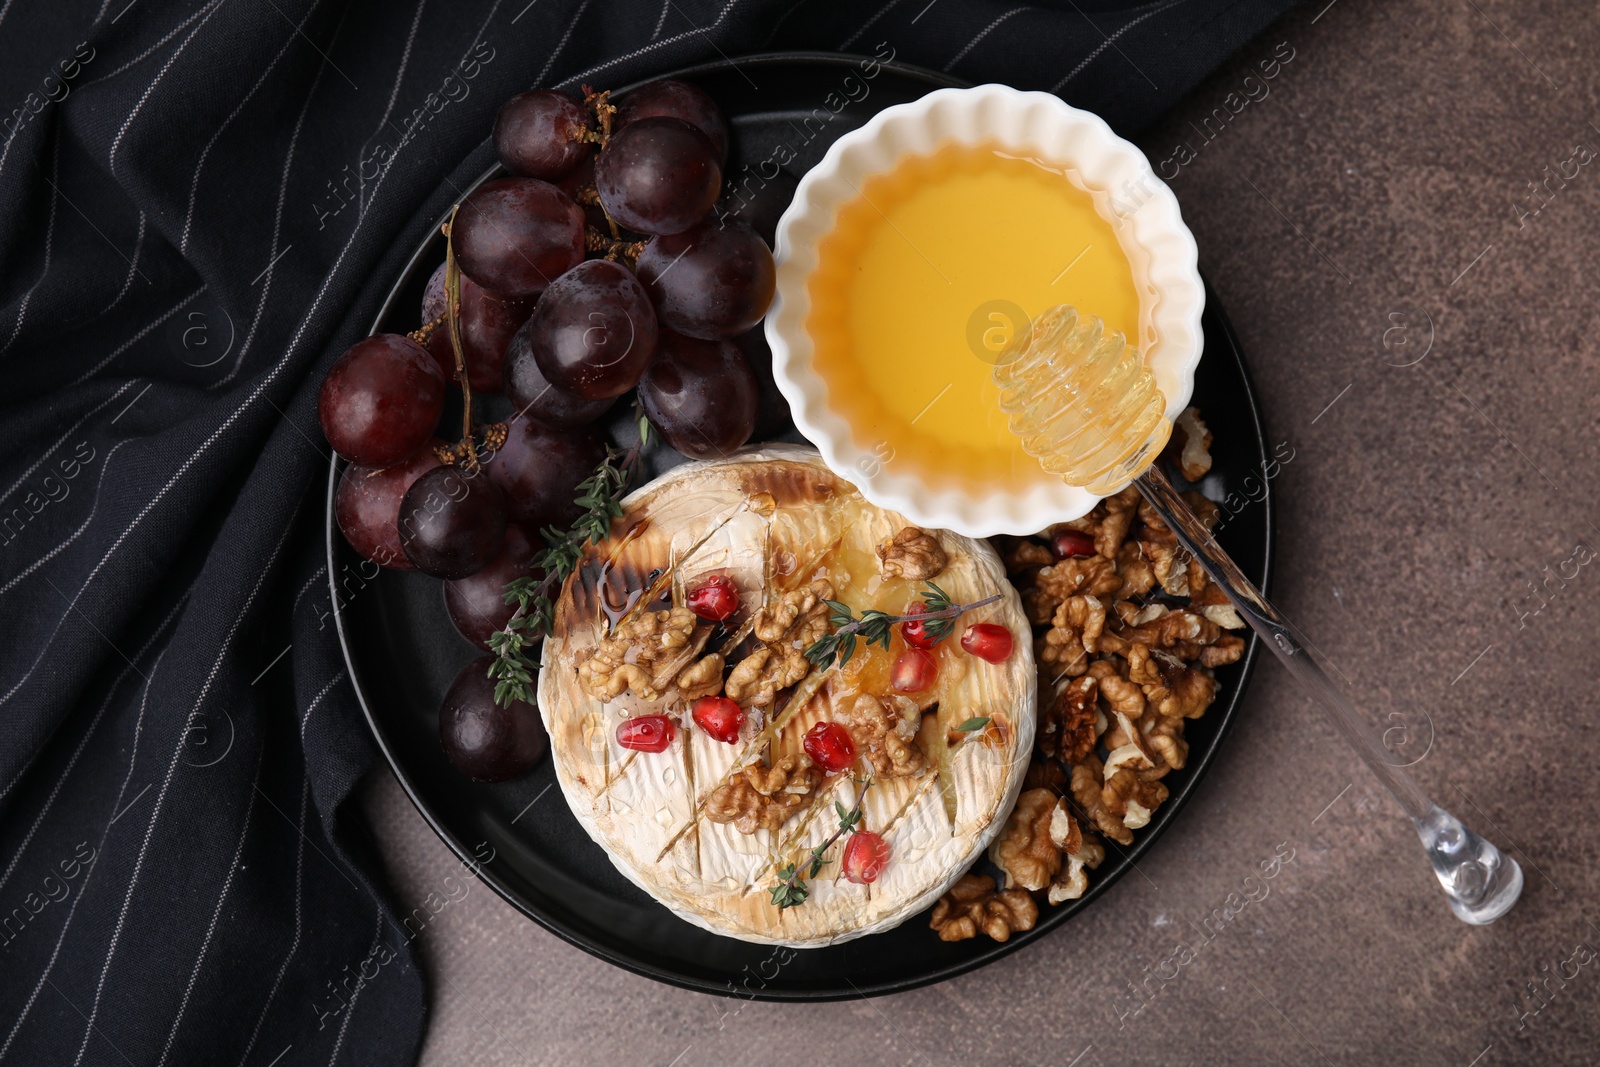 Photo of Plate with tasty baked camembert, honey, grapes, walnuts and pomegranate seeds on brown textured table, top view